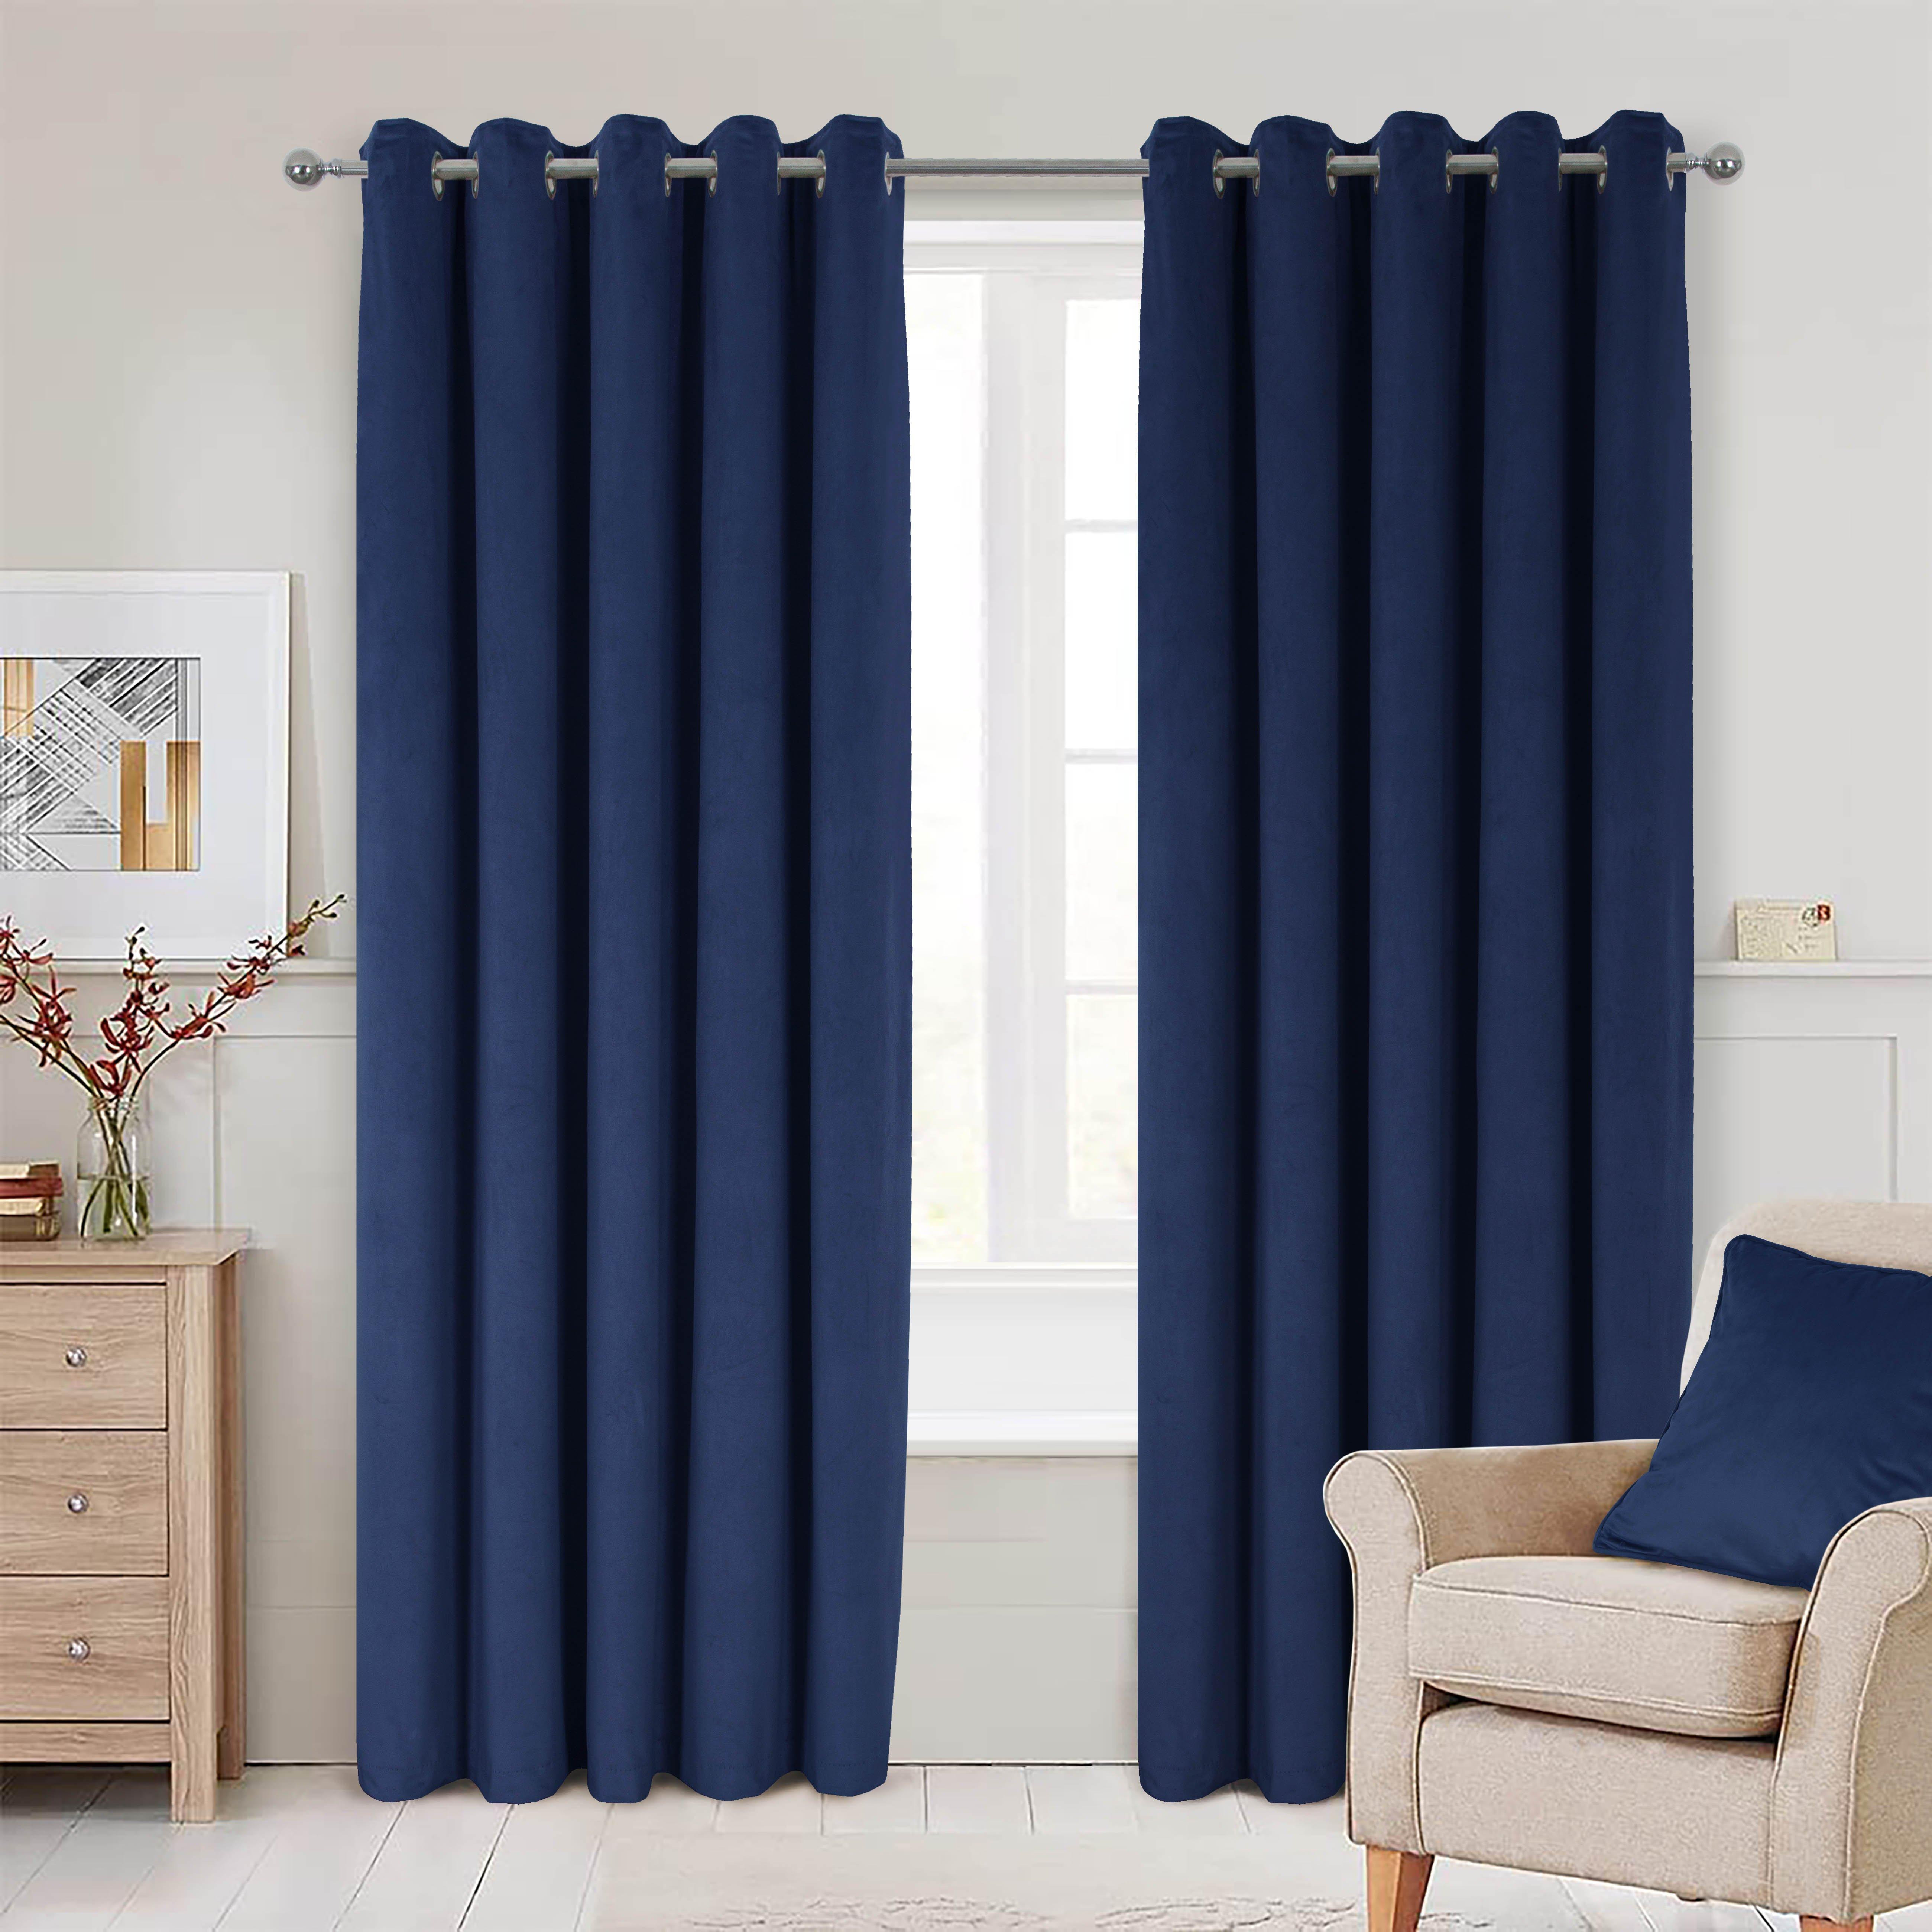 Thermal Interlined Velour Eyelet Curtains Pair - image 1